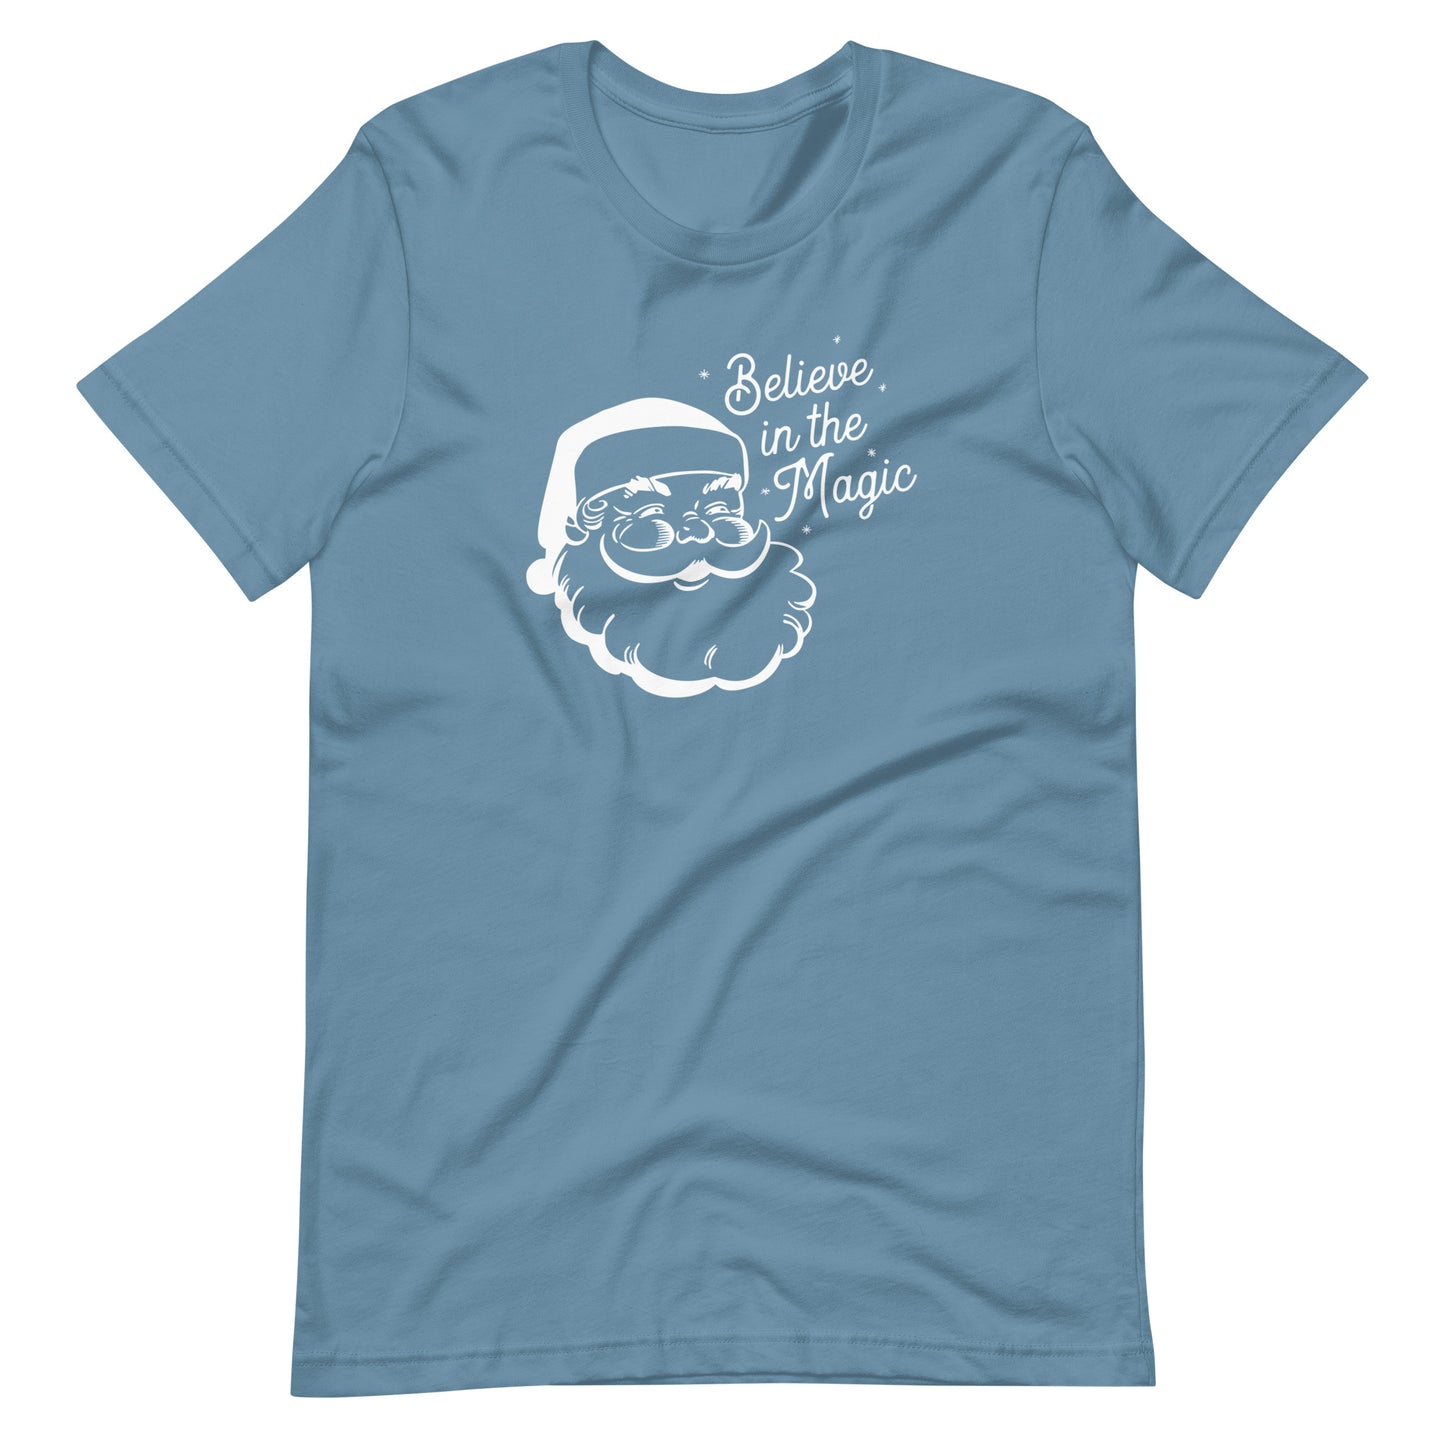 Christmas Believe in the Magic Unisex T-Shirt (more colors available)